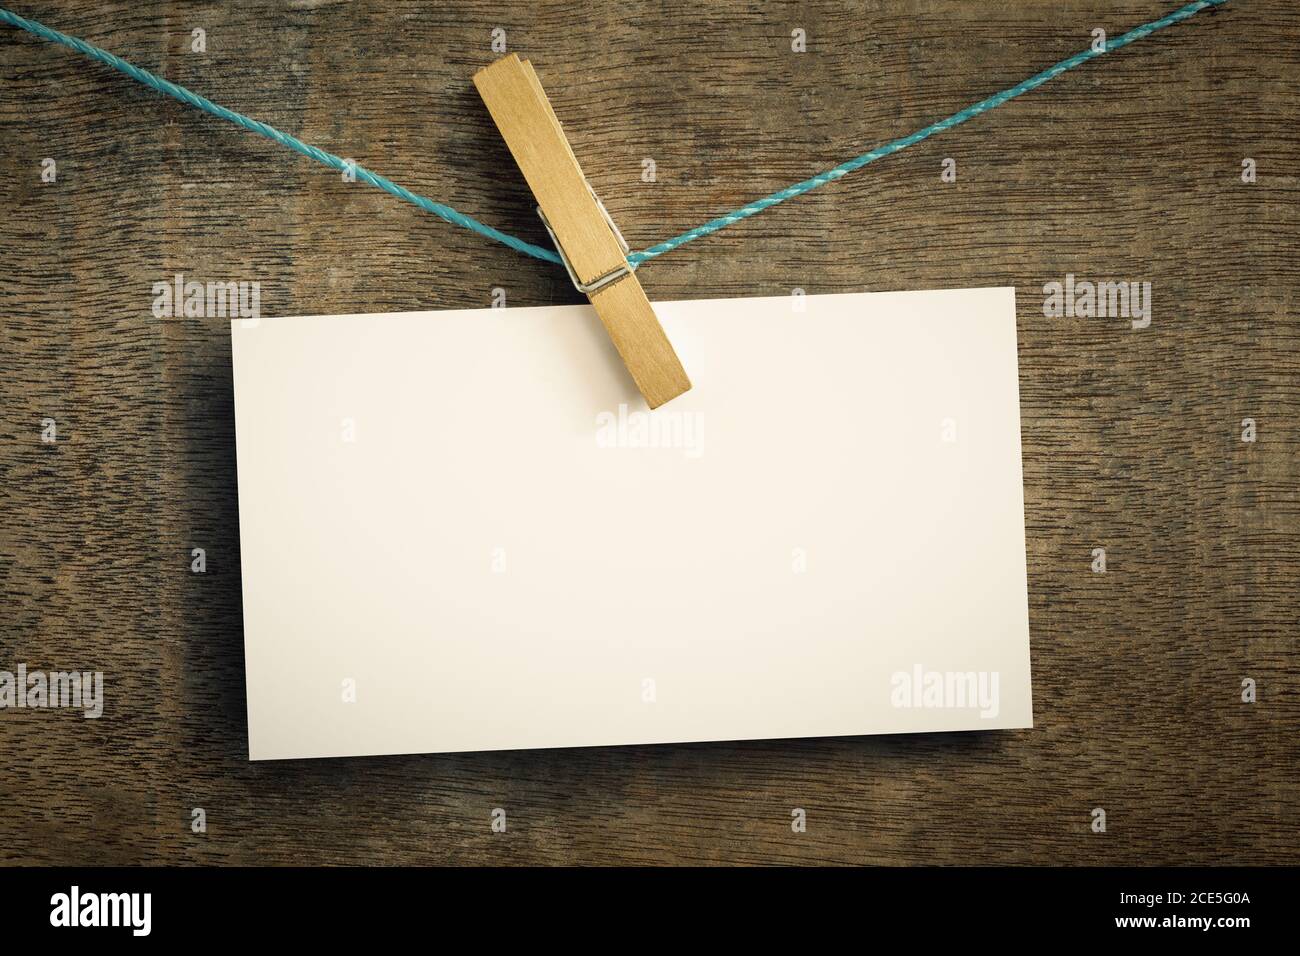 card on wire with clothes peg Stock Photo